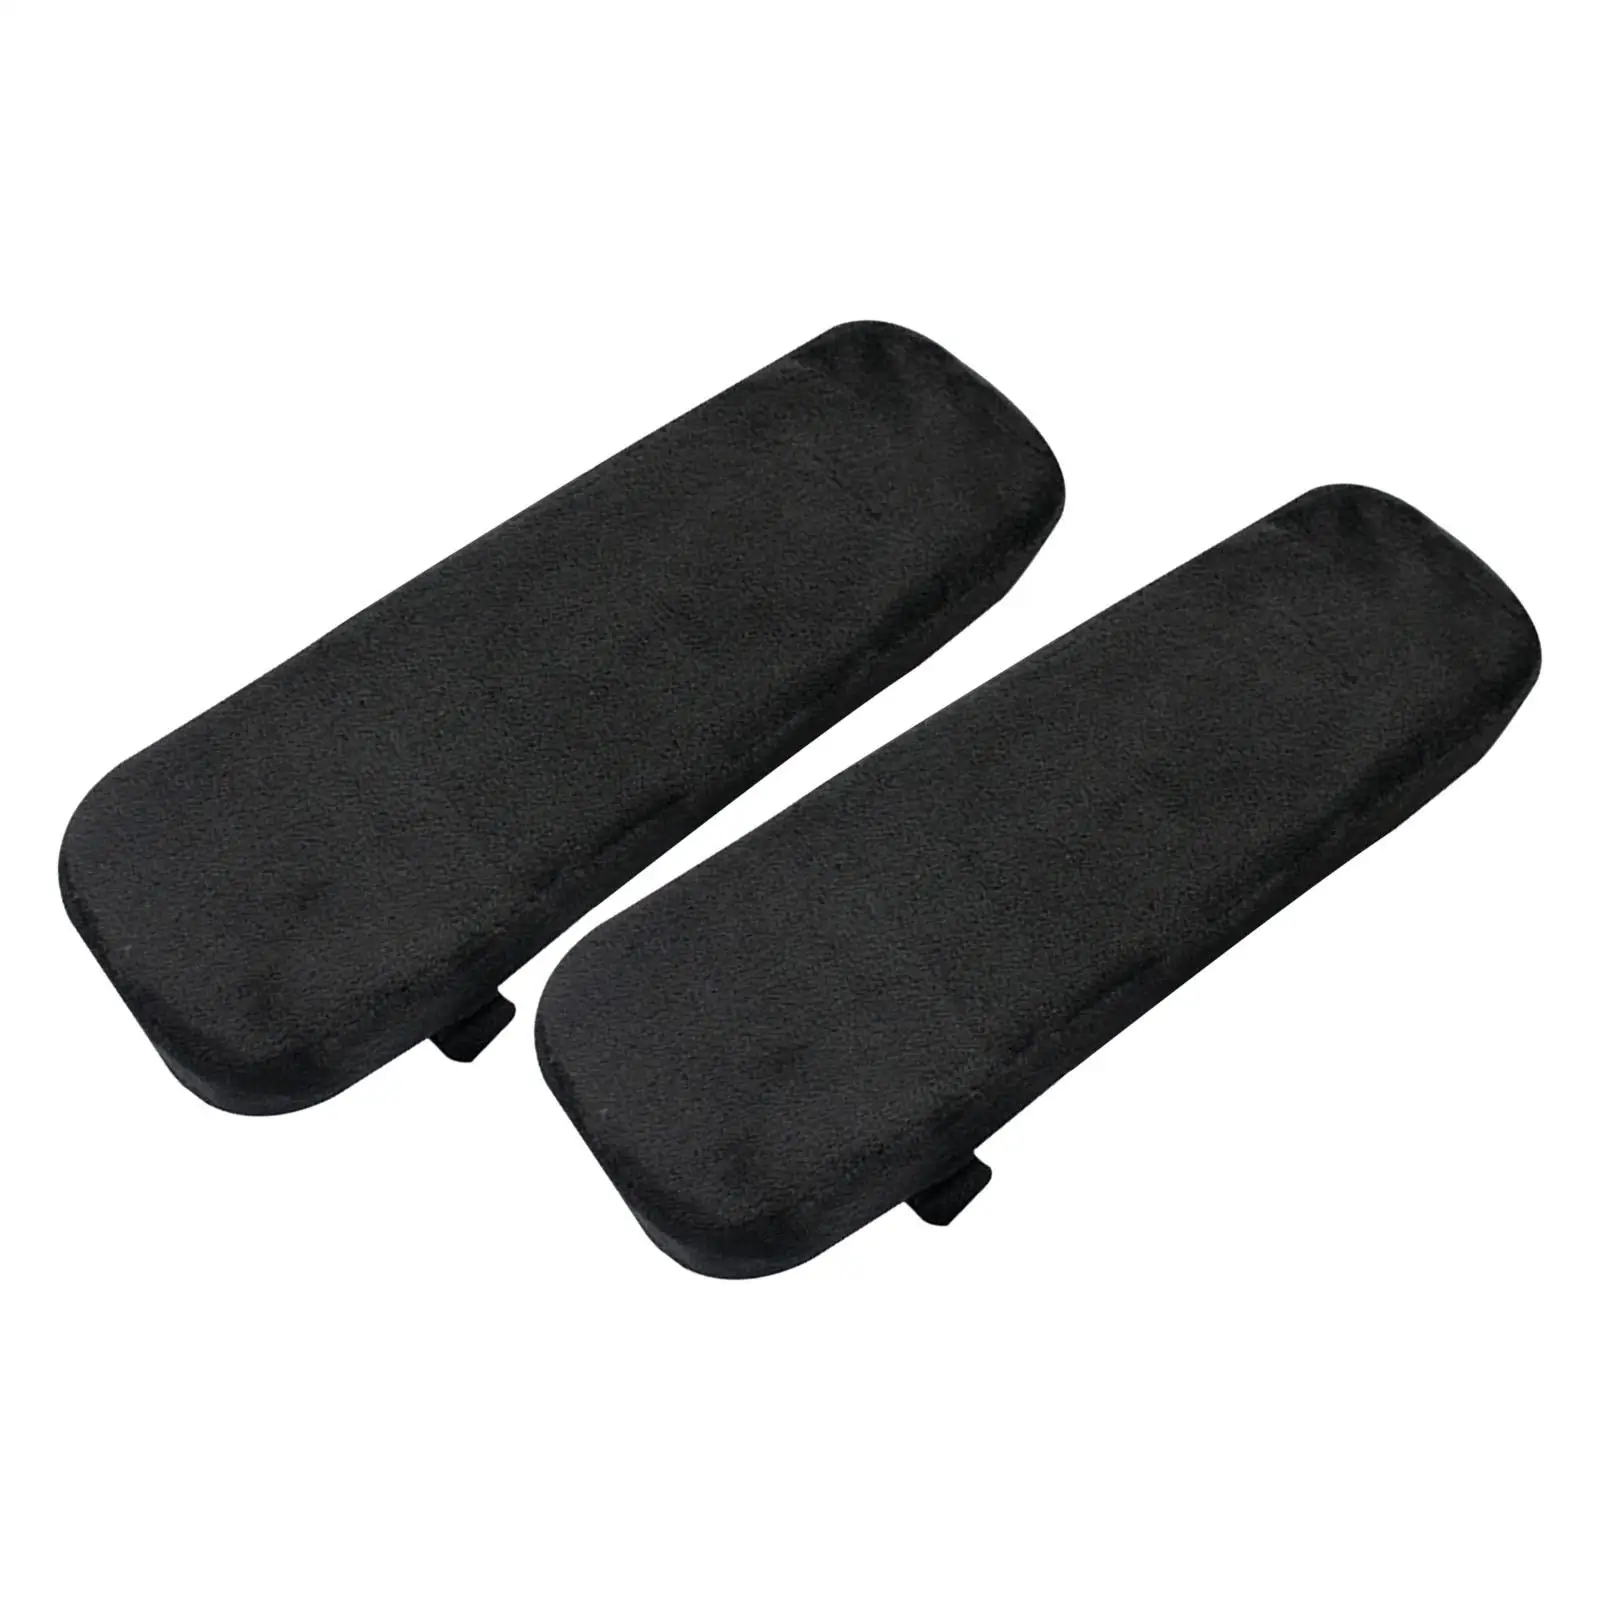 1 Pair Armrest Pads Comfort Universal Removable Armrest Covers Arm Rest Cover for Office Chair